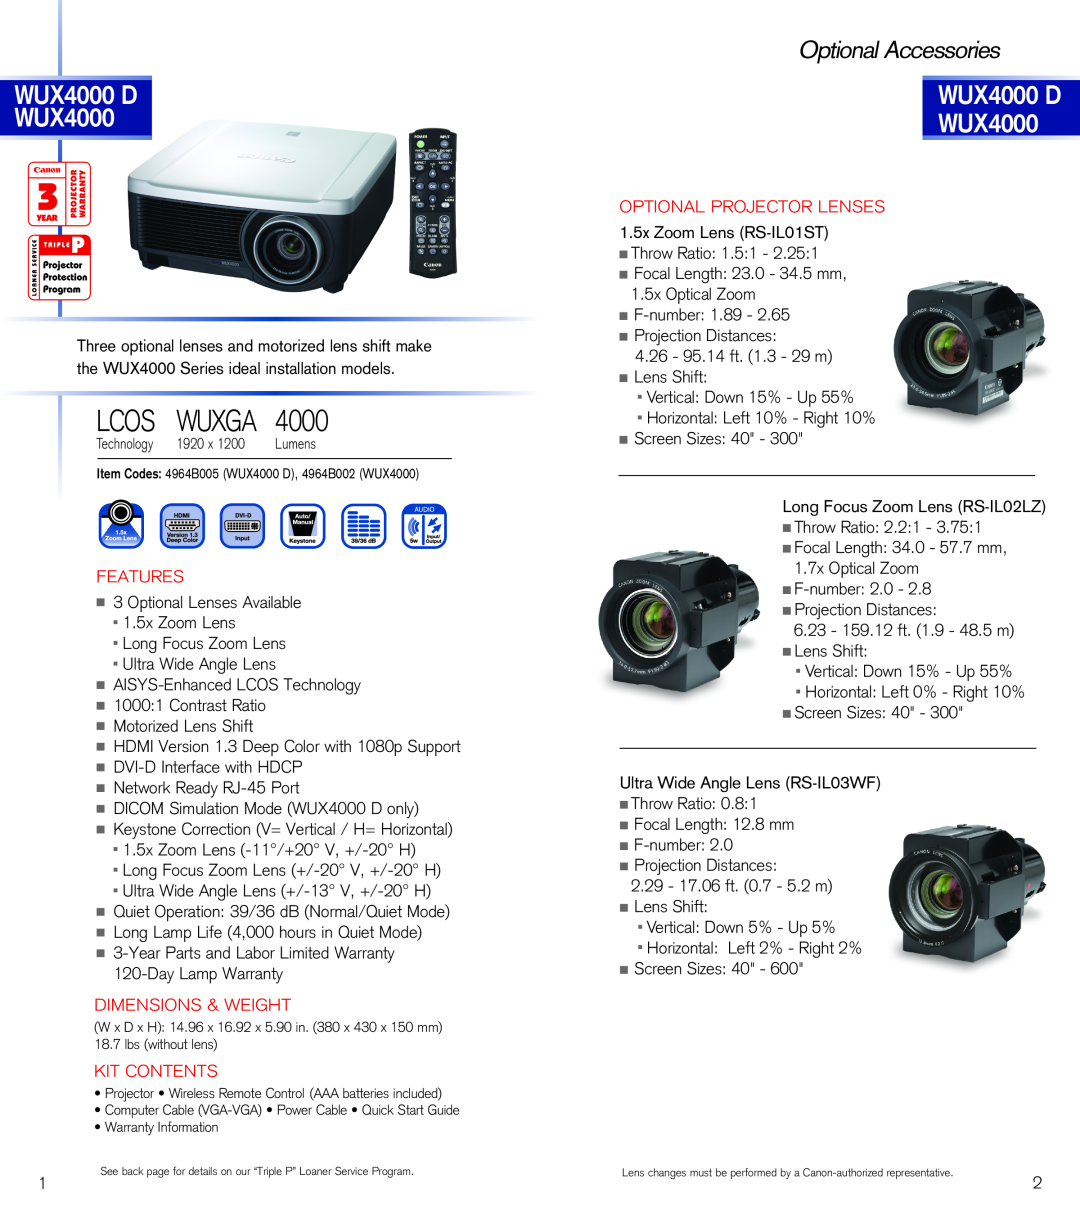 Canon 7390, 8310, 7590 Lcos Wuxga, WUX4000 D WUX4000, Optional Accessories, Features­, Dimensions & Weight, Kit Contents 